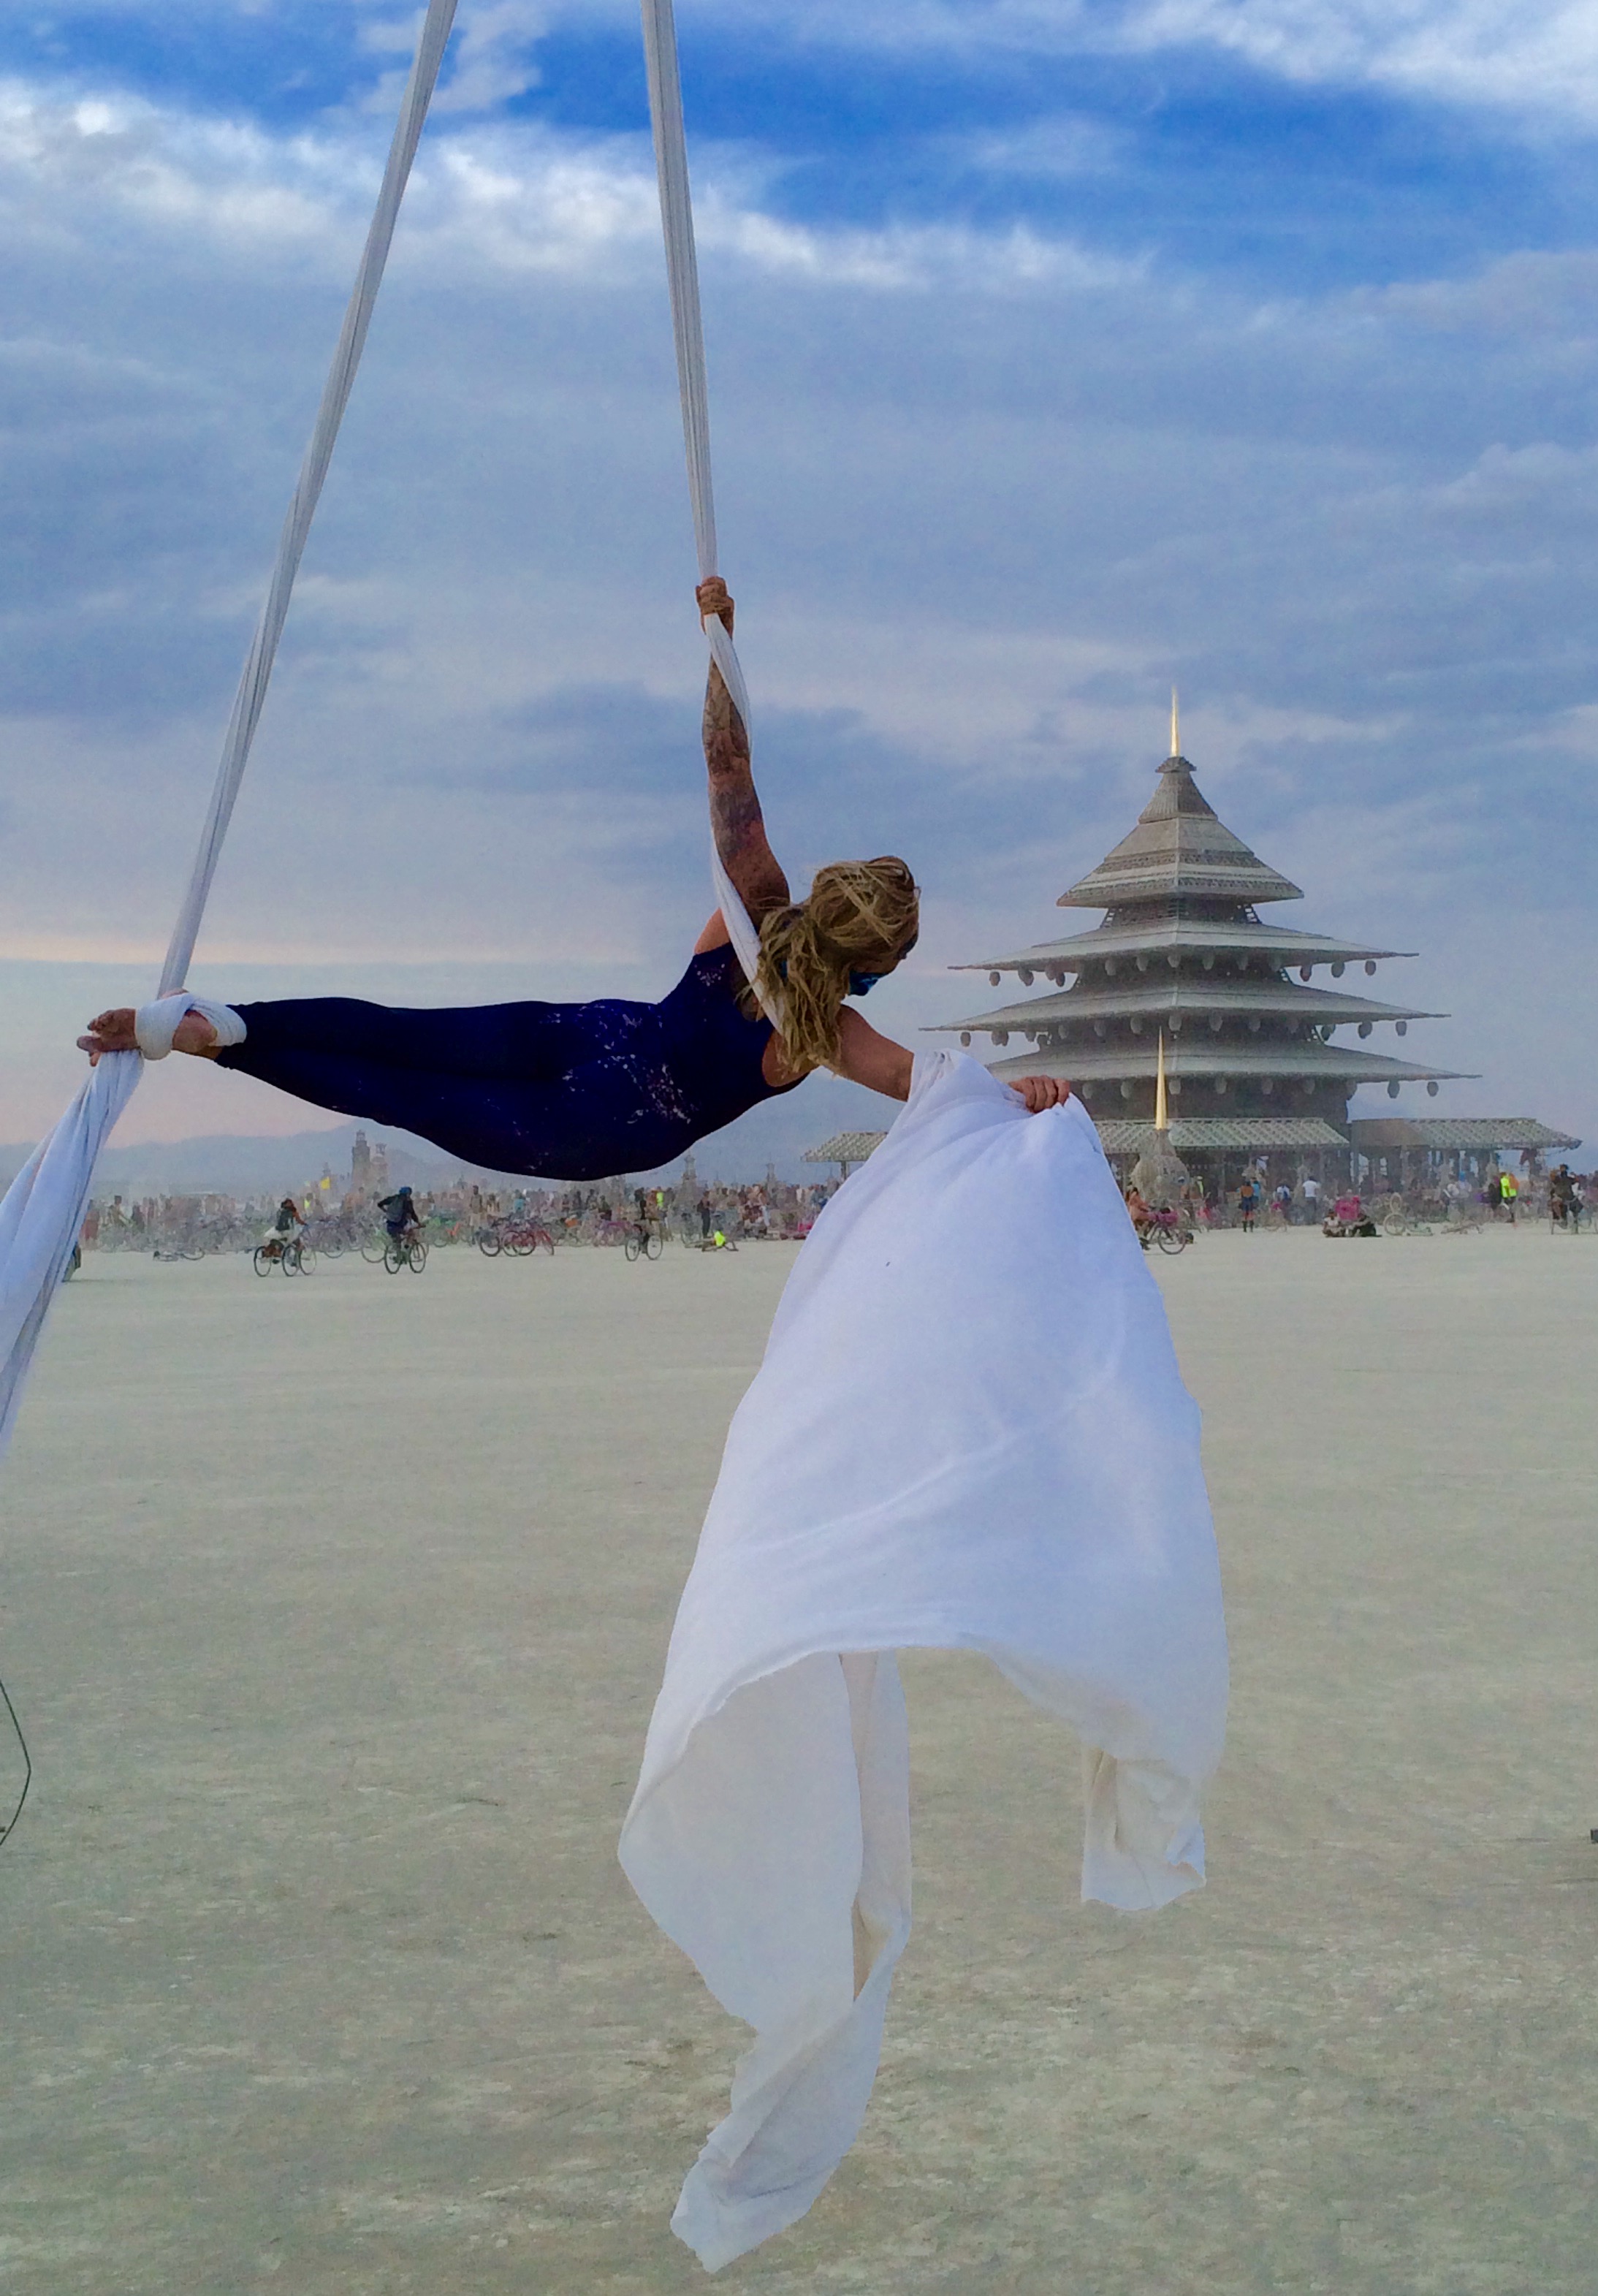  Aerial Performance at the Temple, Burning Man 2016 